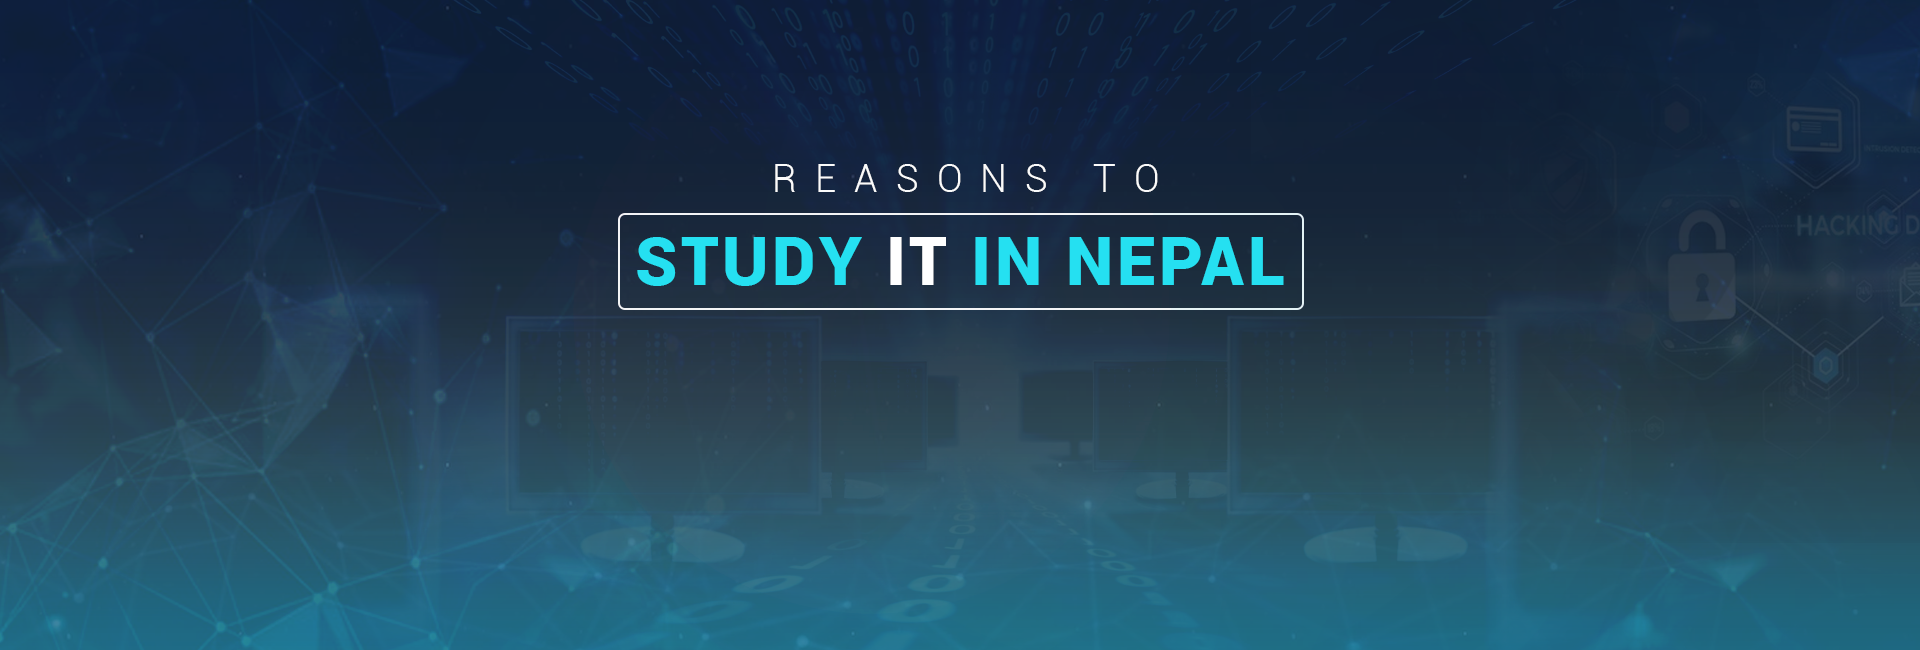 Why study IT in Nepal | Reasons to study IT in Nepal